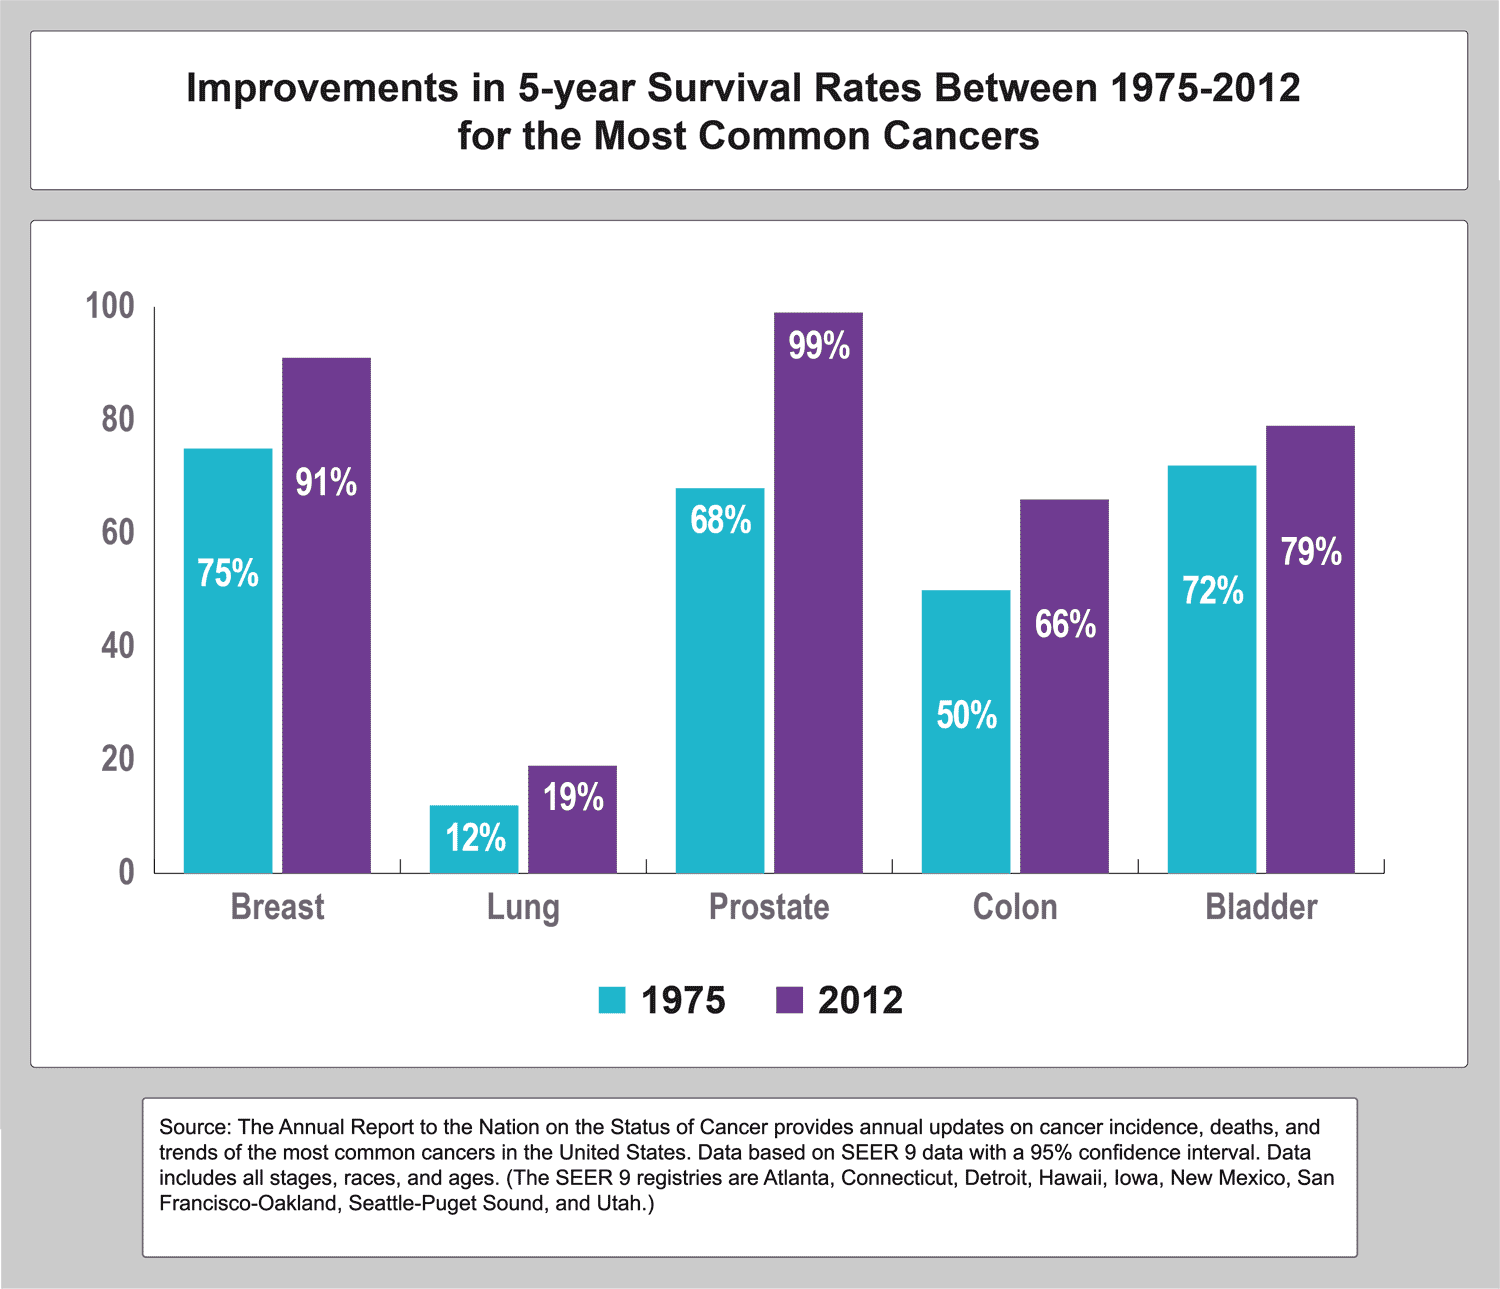 Improvements in 5-year Survival Rates Between 1975-2012 for the Most Common Cancers. Source: The Annual Report to the Nation on the Status of Cancer provides annual updates on cancer incidence, deaths, and trends of the most common cancers in the United States. Data based on SEER 9 data with a 95% confidence inverval. Data includes all stages, race and ages.